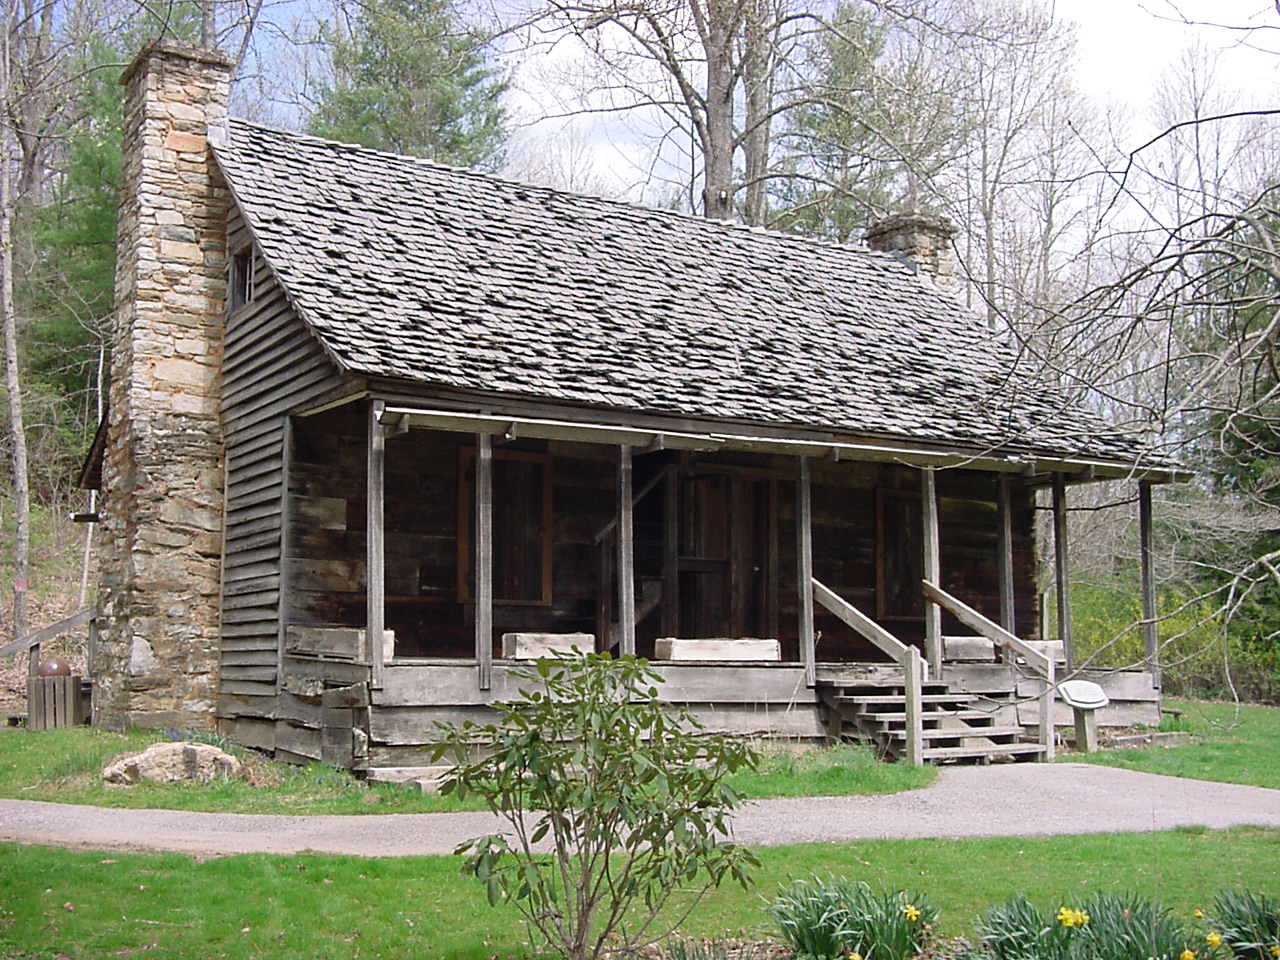 this is an old log cabin in a wooded area